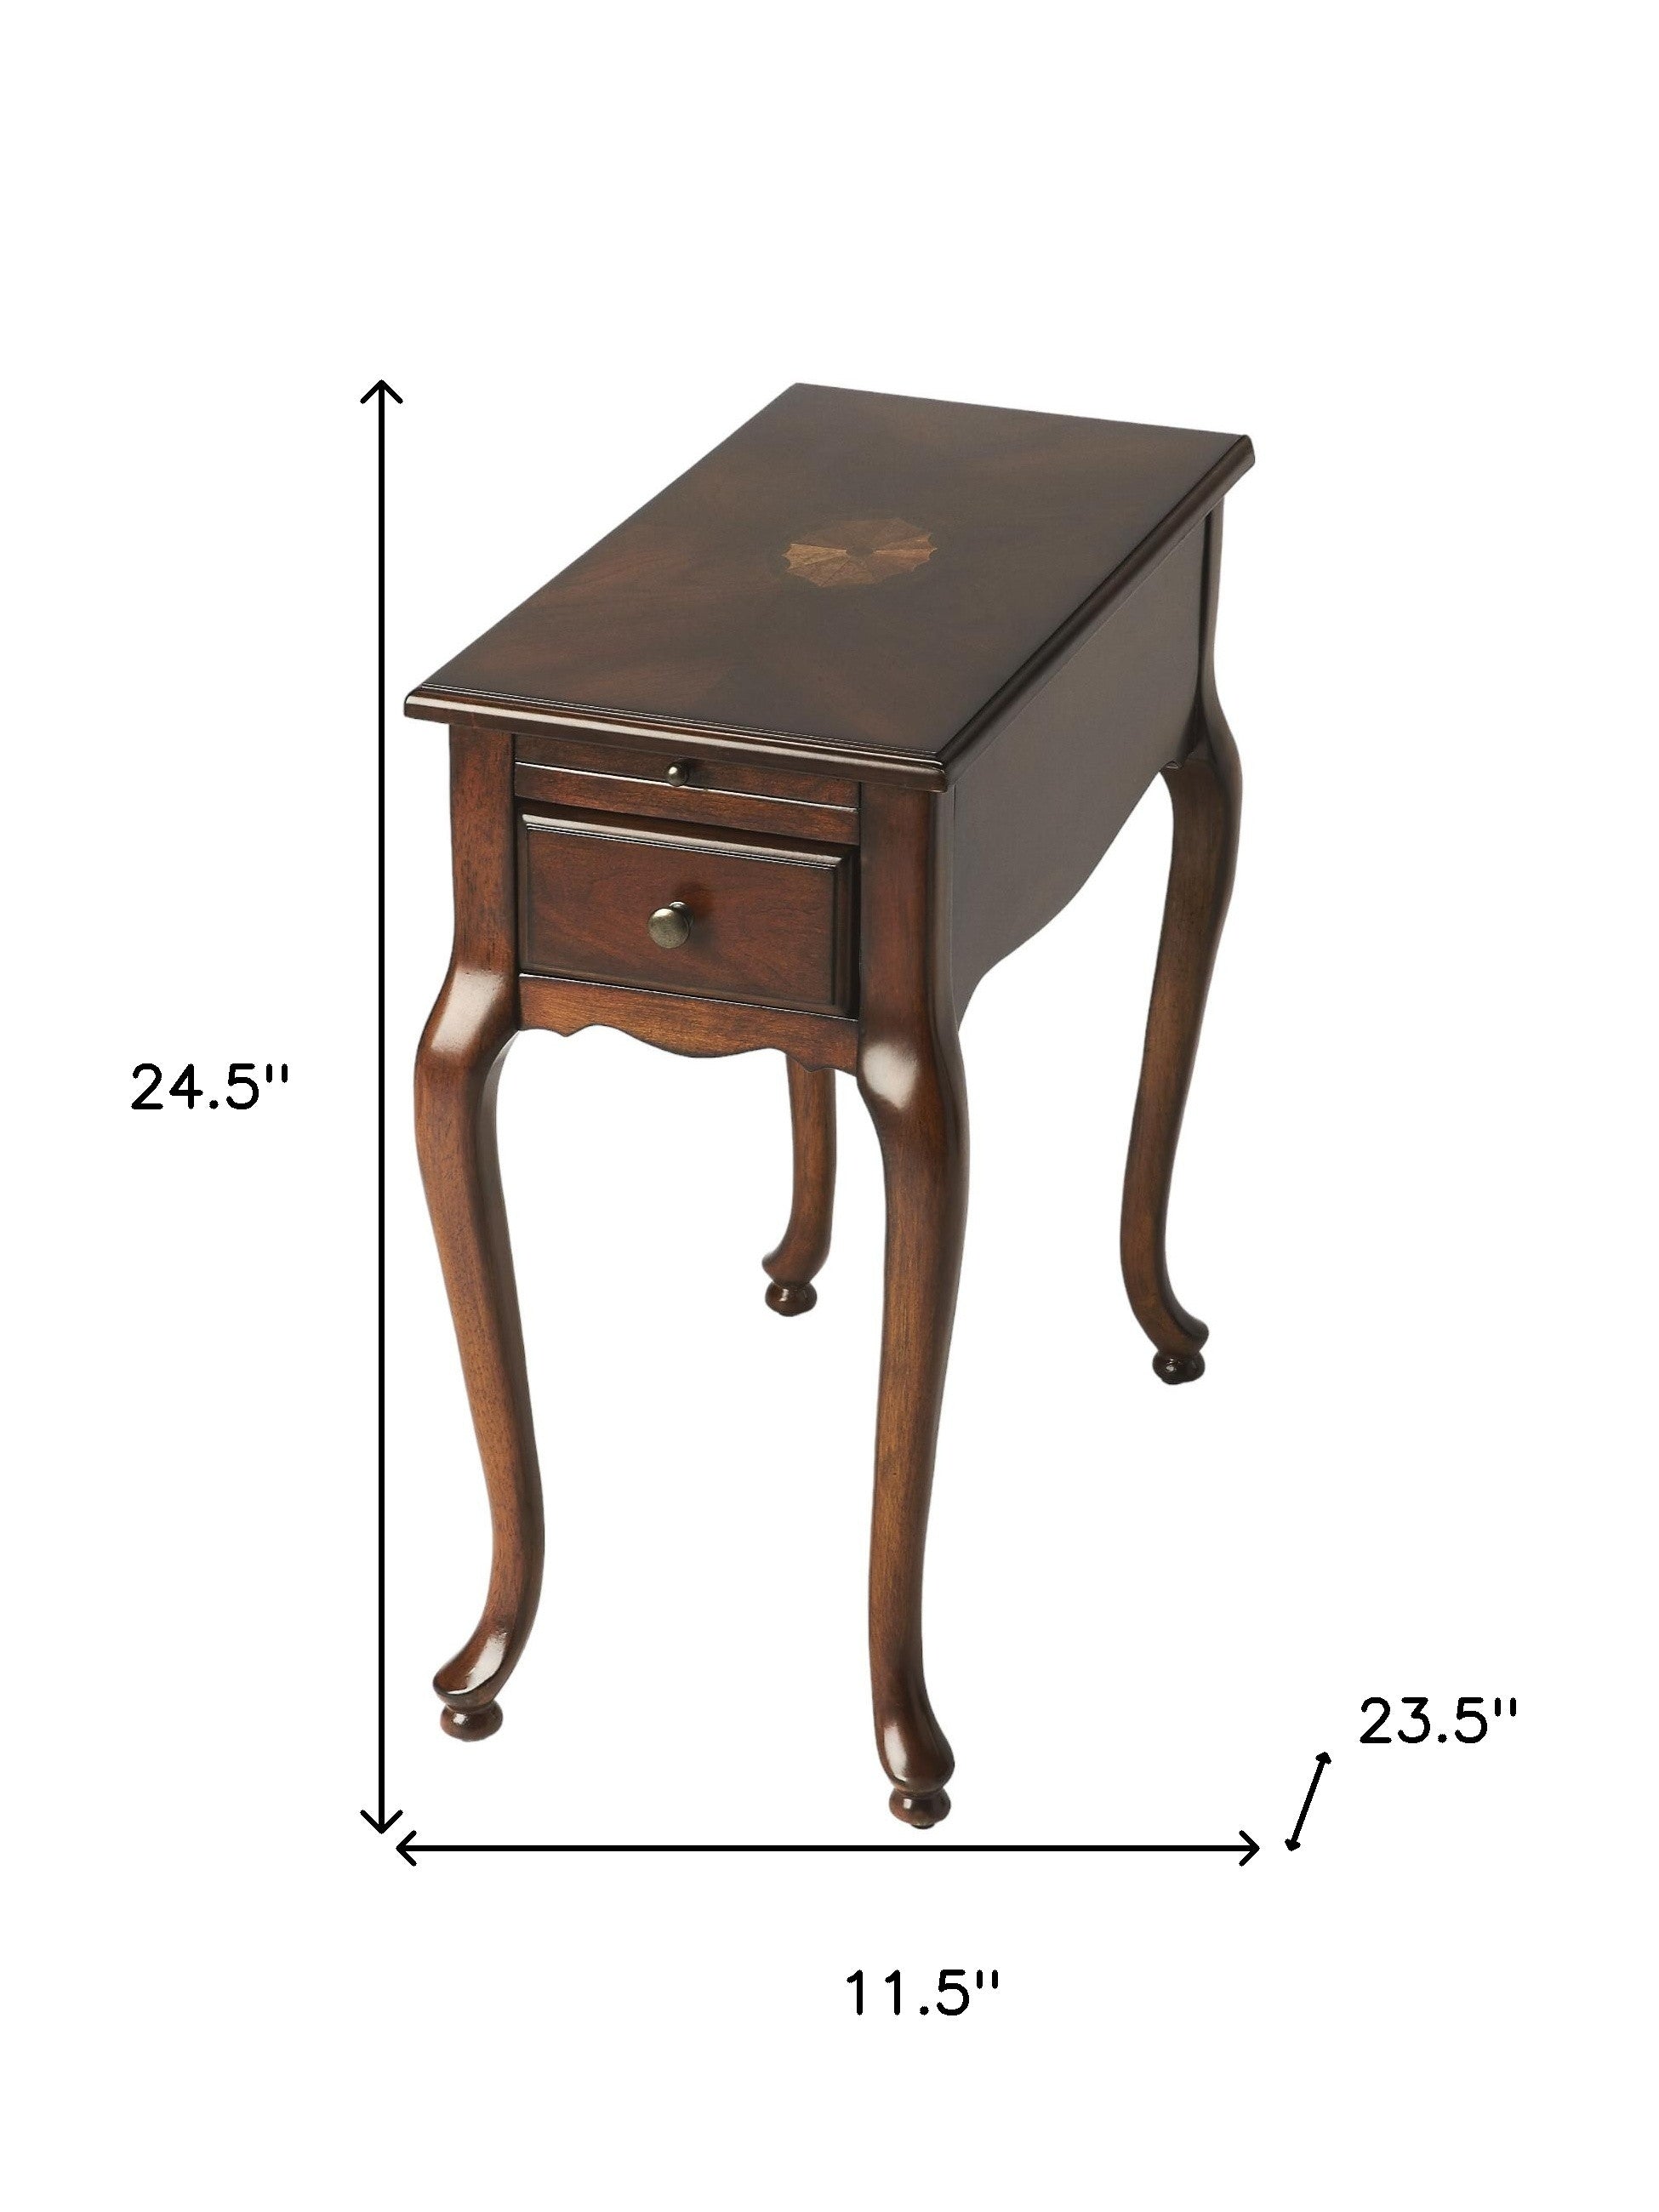 25" Cherry Brown Solid And Manufactured Wood Rectangular End Table With Drawer